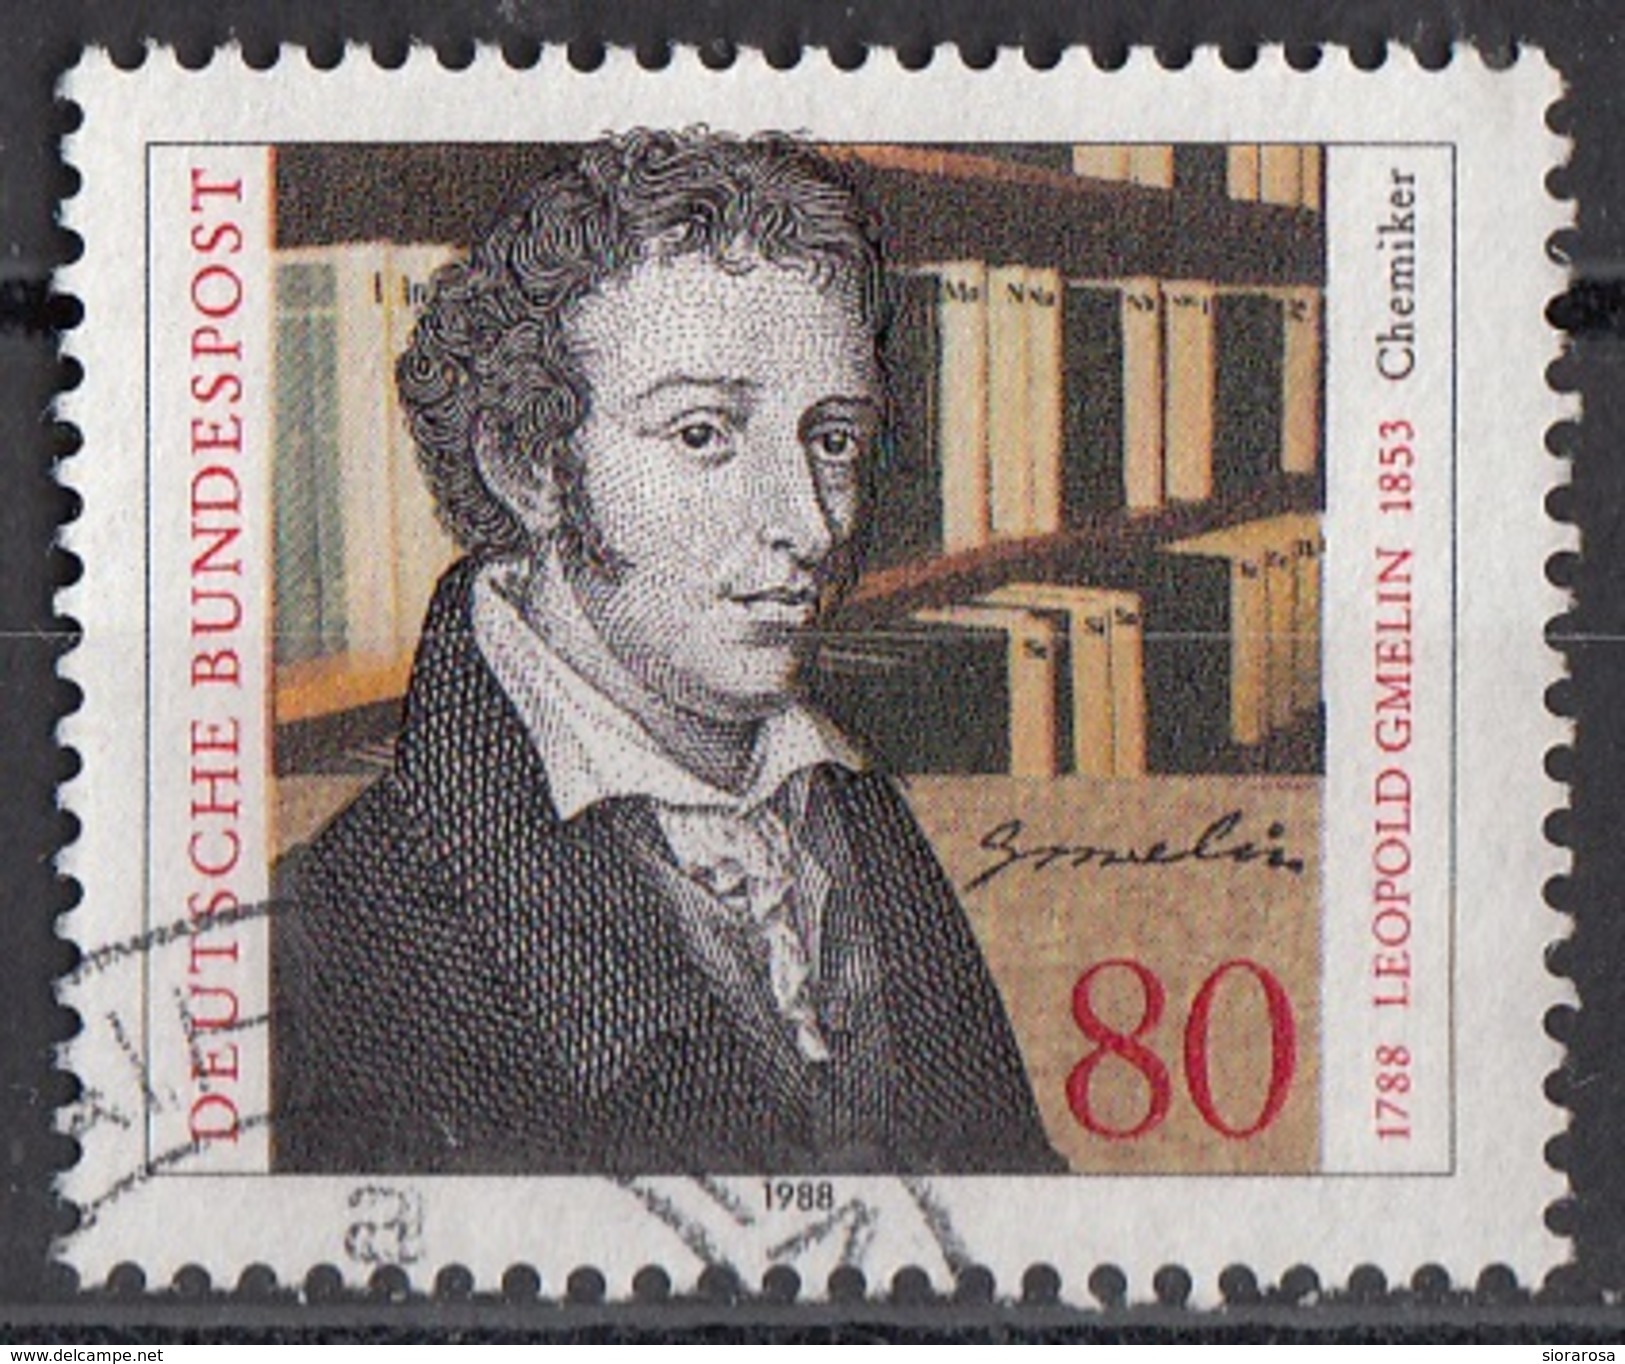 1560 Germania 1988 Leopold Gmelin (1788-1853) Chimico  Germany Bundespost Used - Chimica